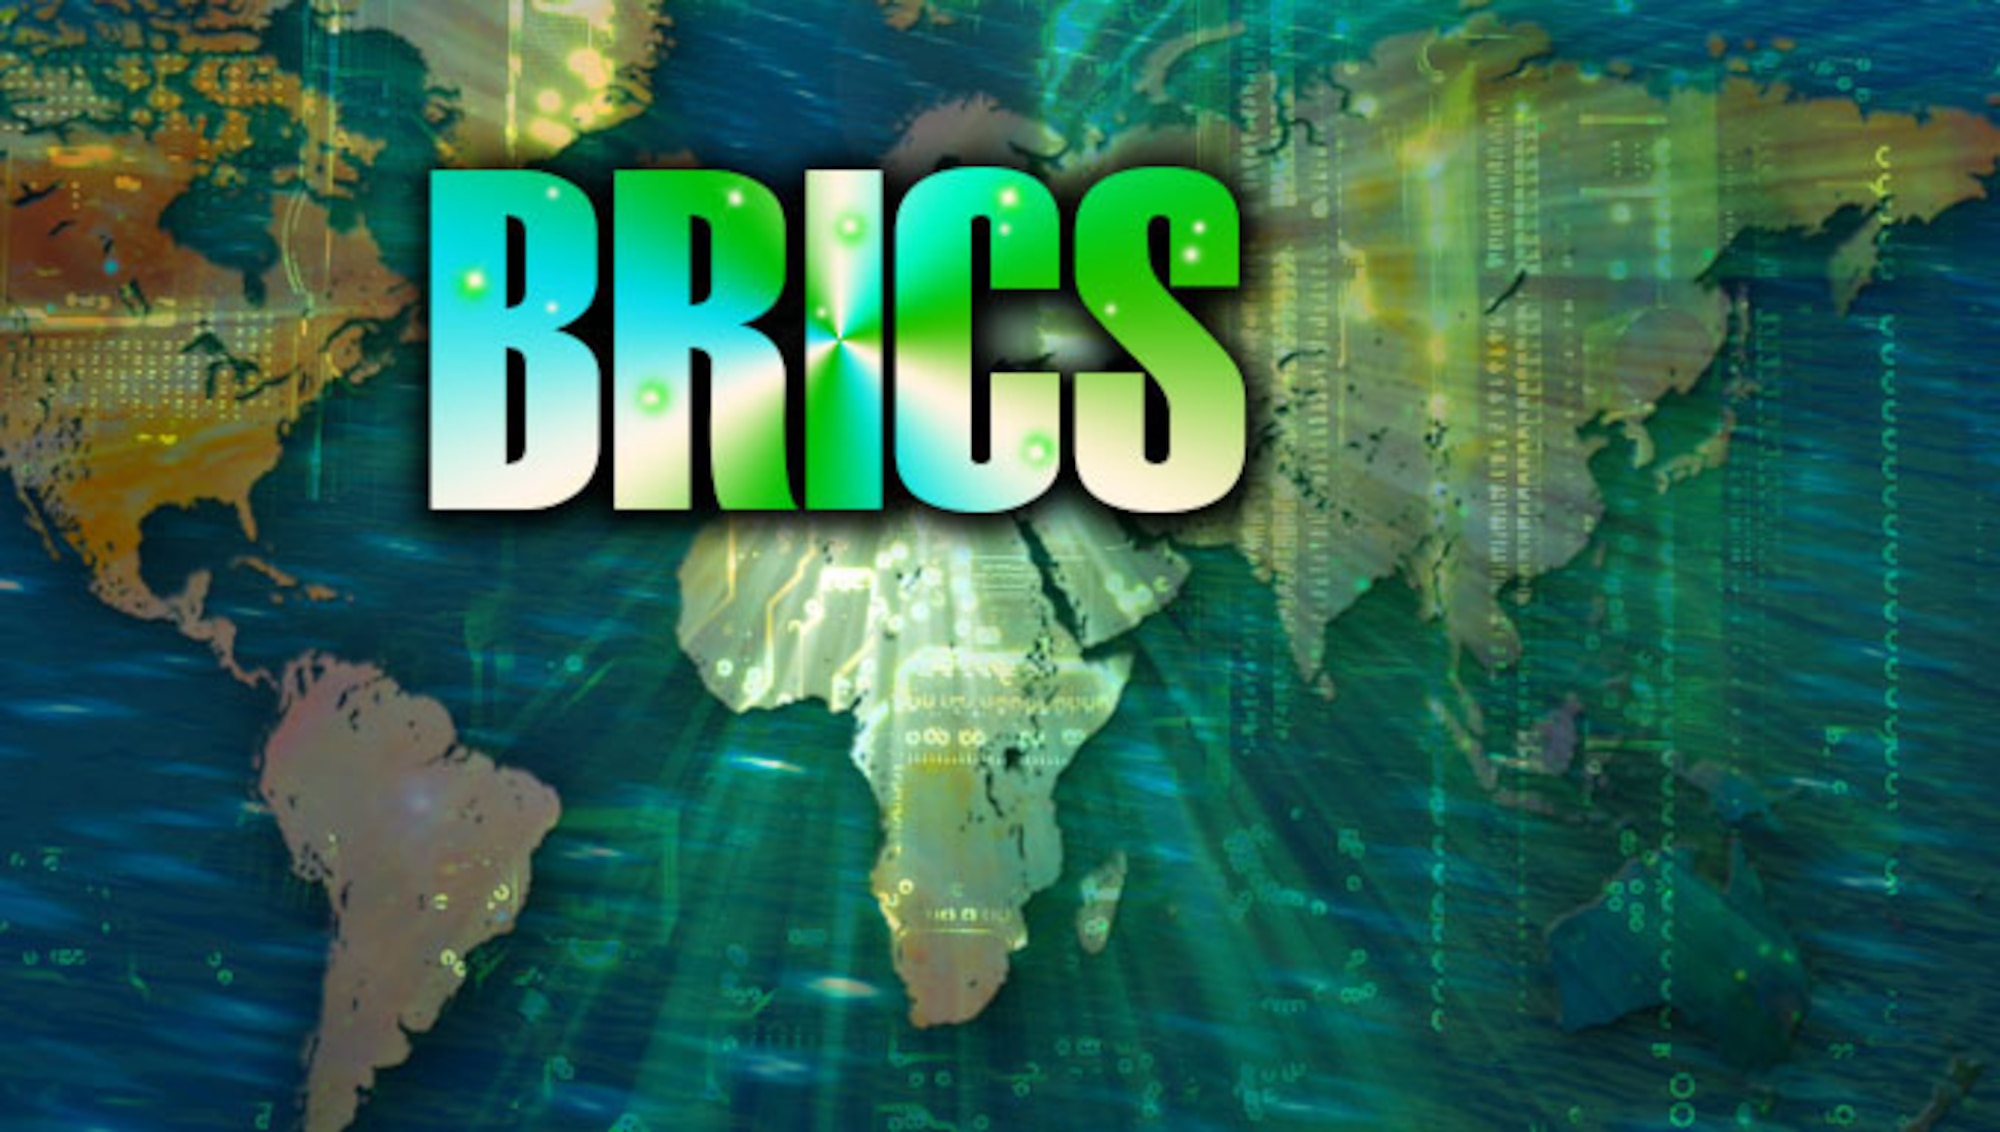 Artist's digital rendering of a brightly colored map portraying the spread of cyber national intelligence information throughout BRICS network. BRICS logo stands for Brazil, Russia, India, China and South Africa network system.